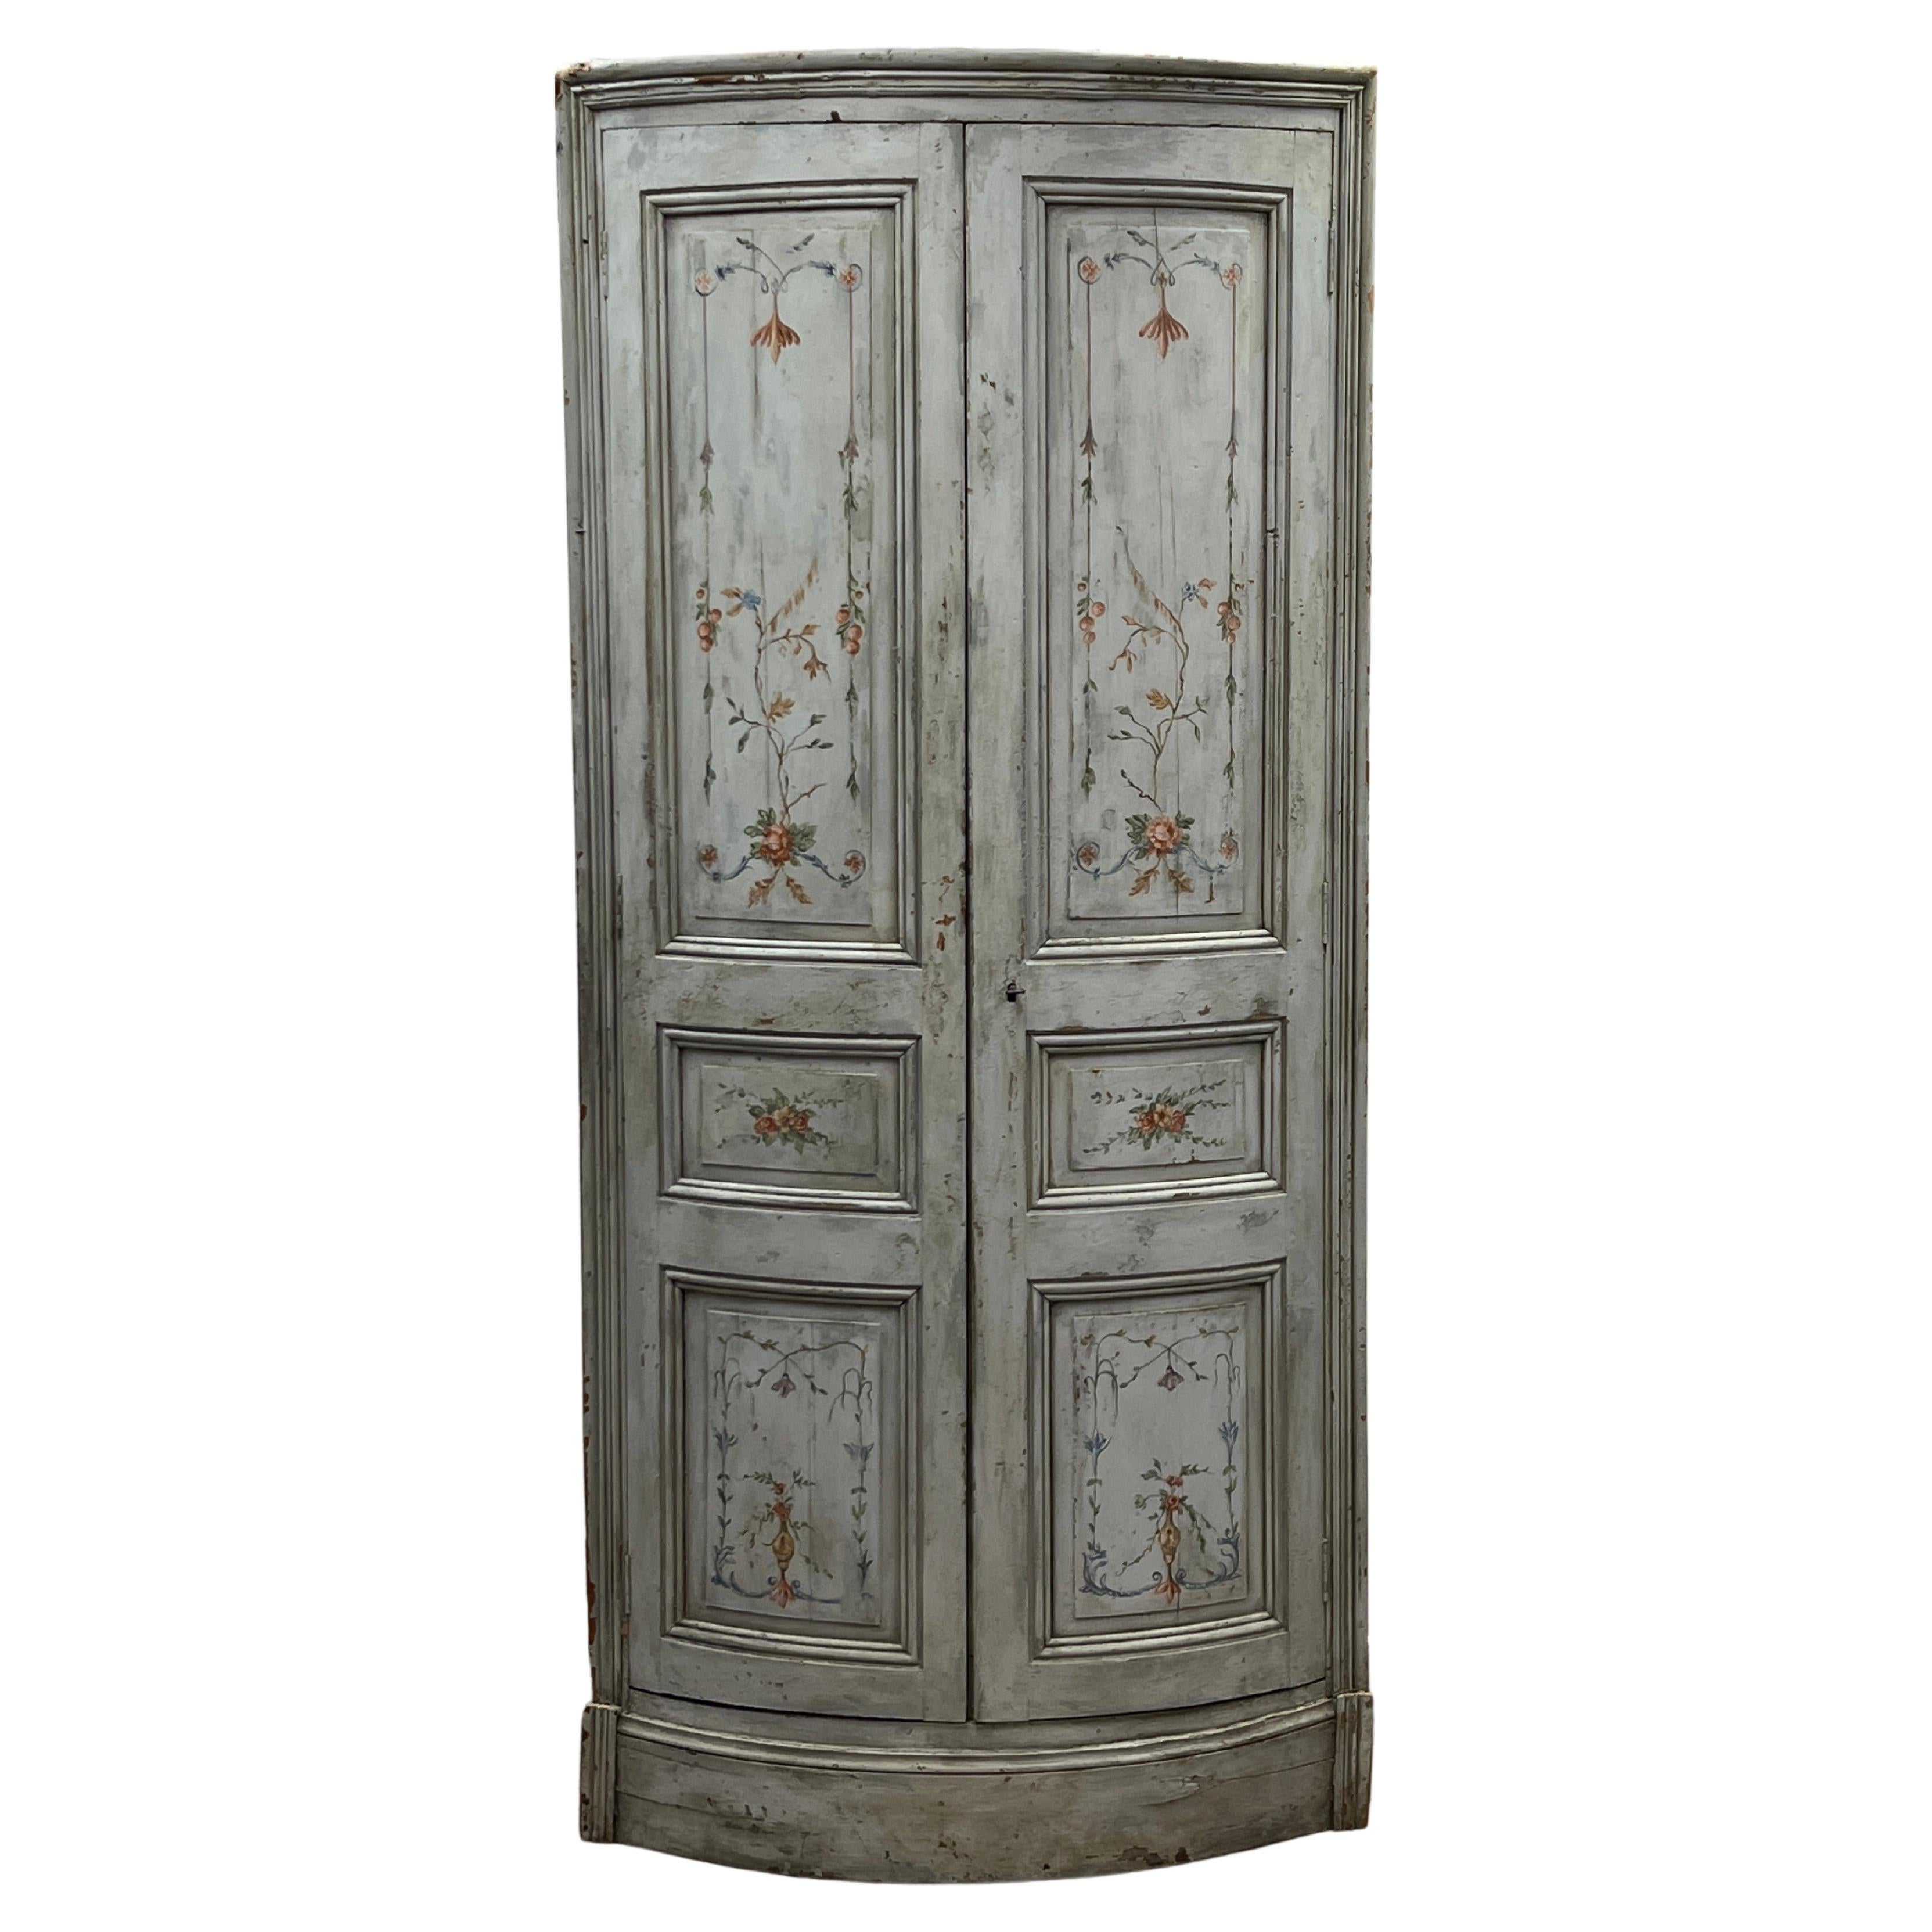 19th Century French Hand-Painted Bow Front Corner Cupboard